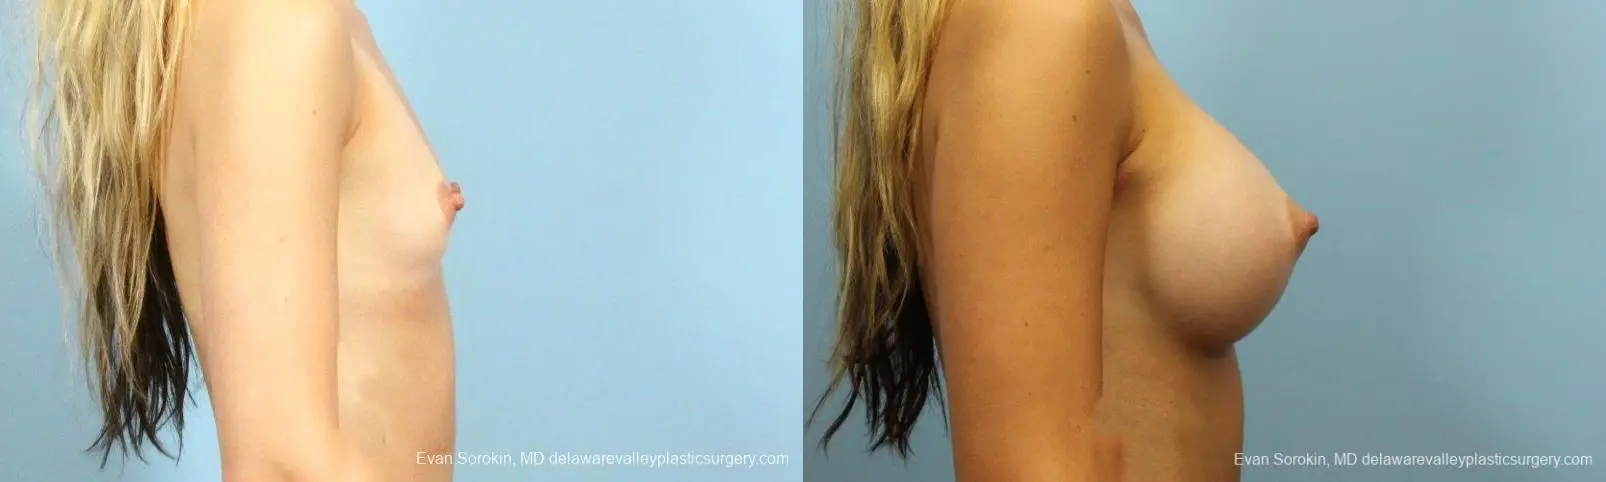 Philadelphia Breast Augmentation 9409 - Before and After 3